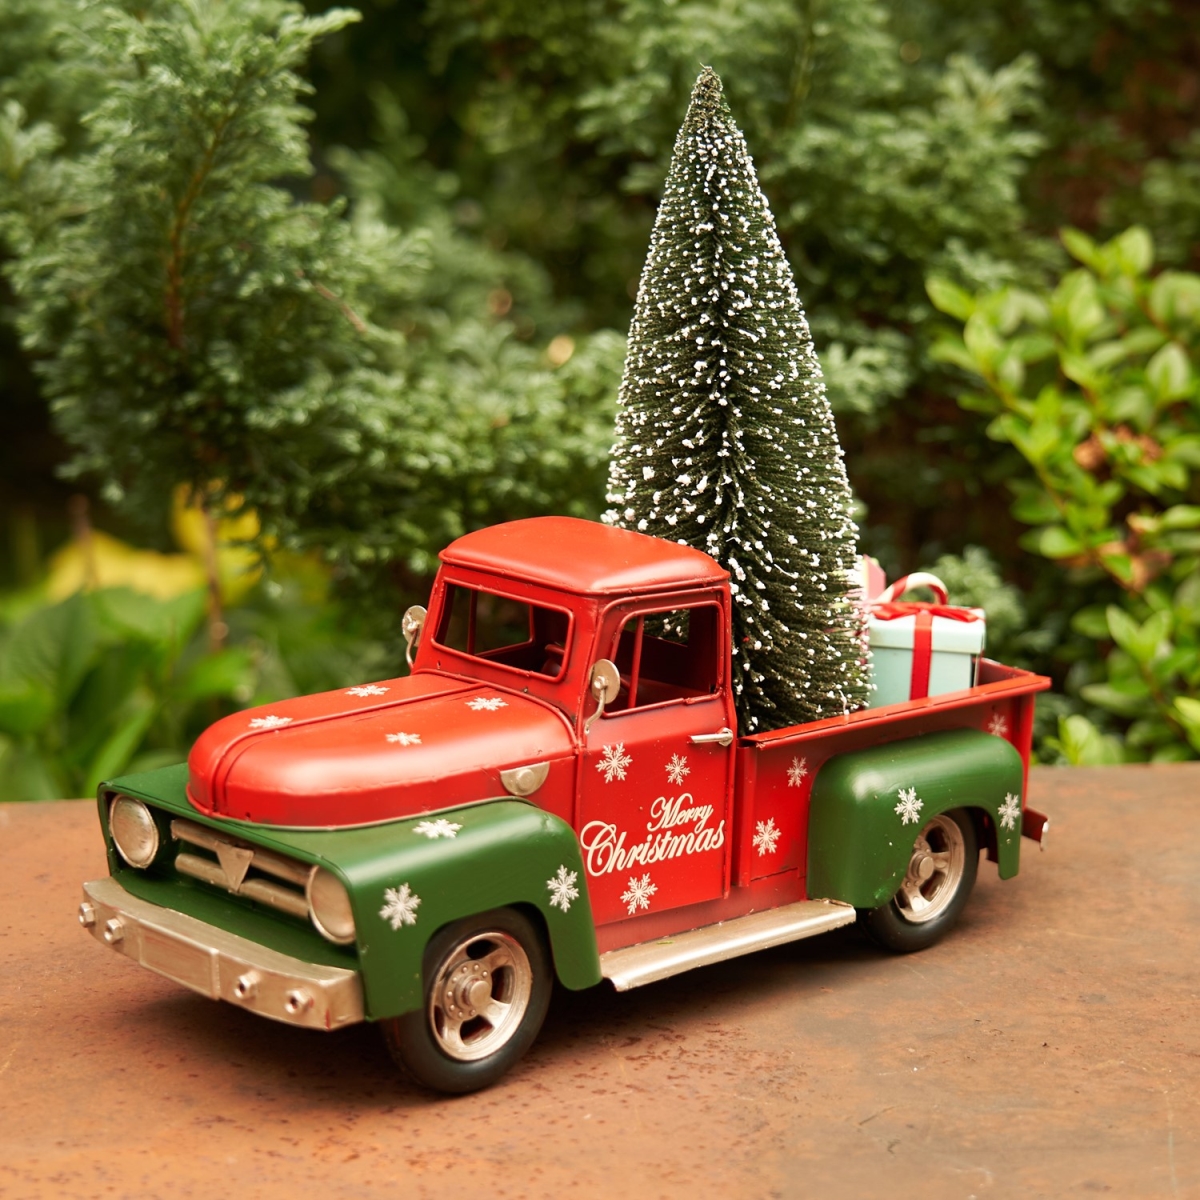 Picture of Zaer ZR191852 14.71 x 5.71 x 12.2 in. Iron Christmas Truck with Snowflakes & Tree - Red & Green